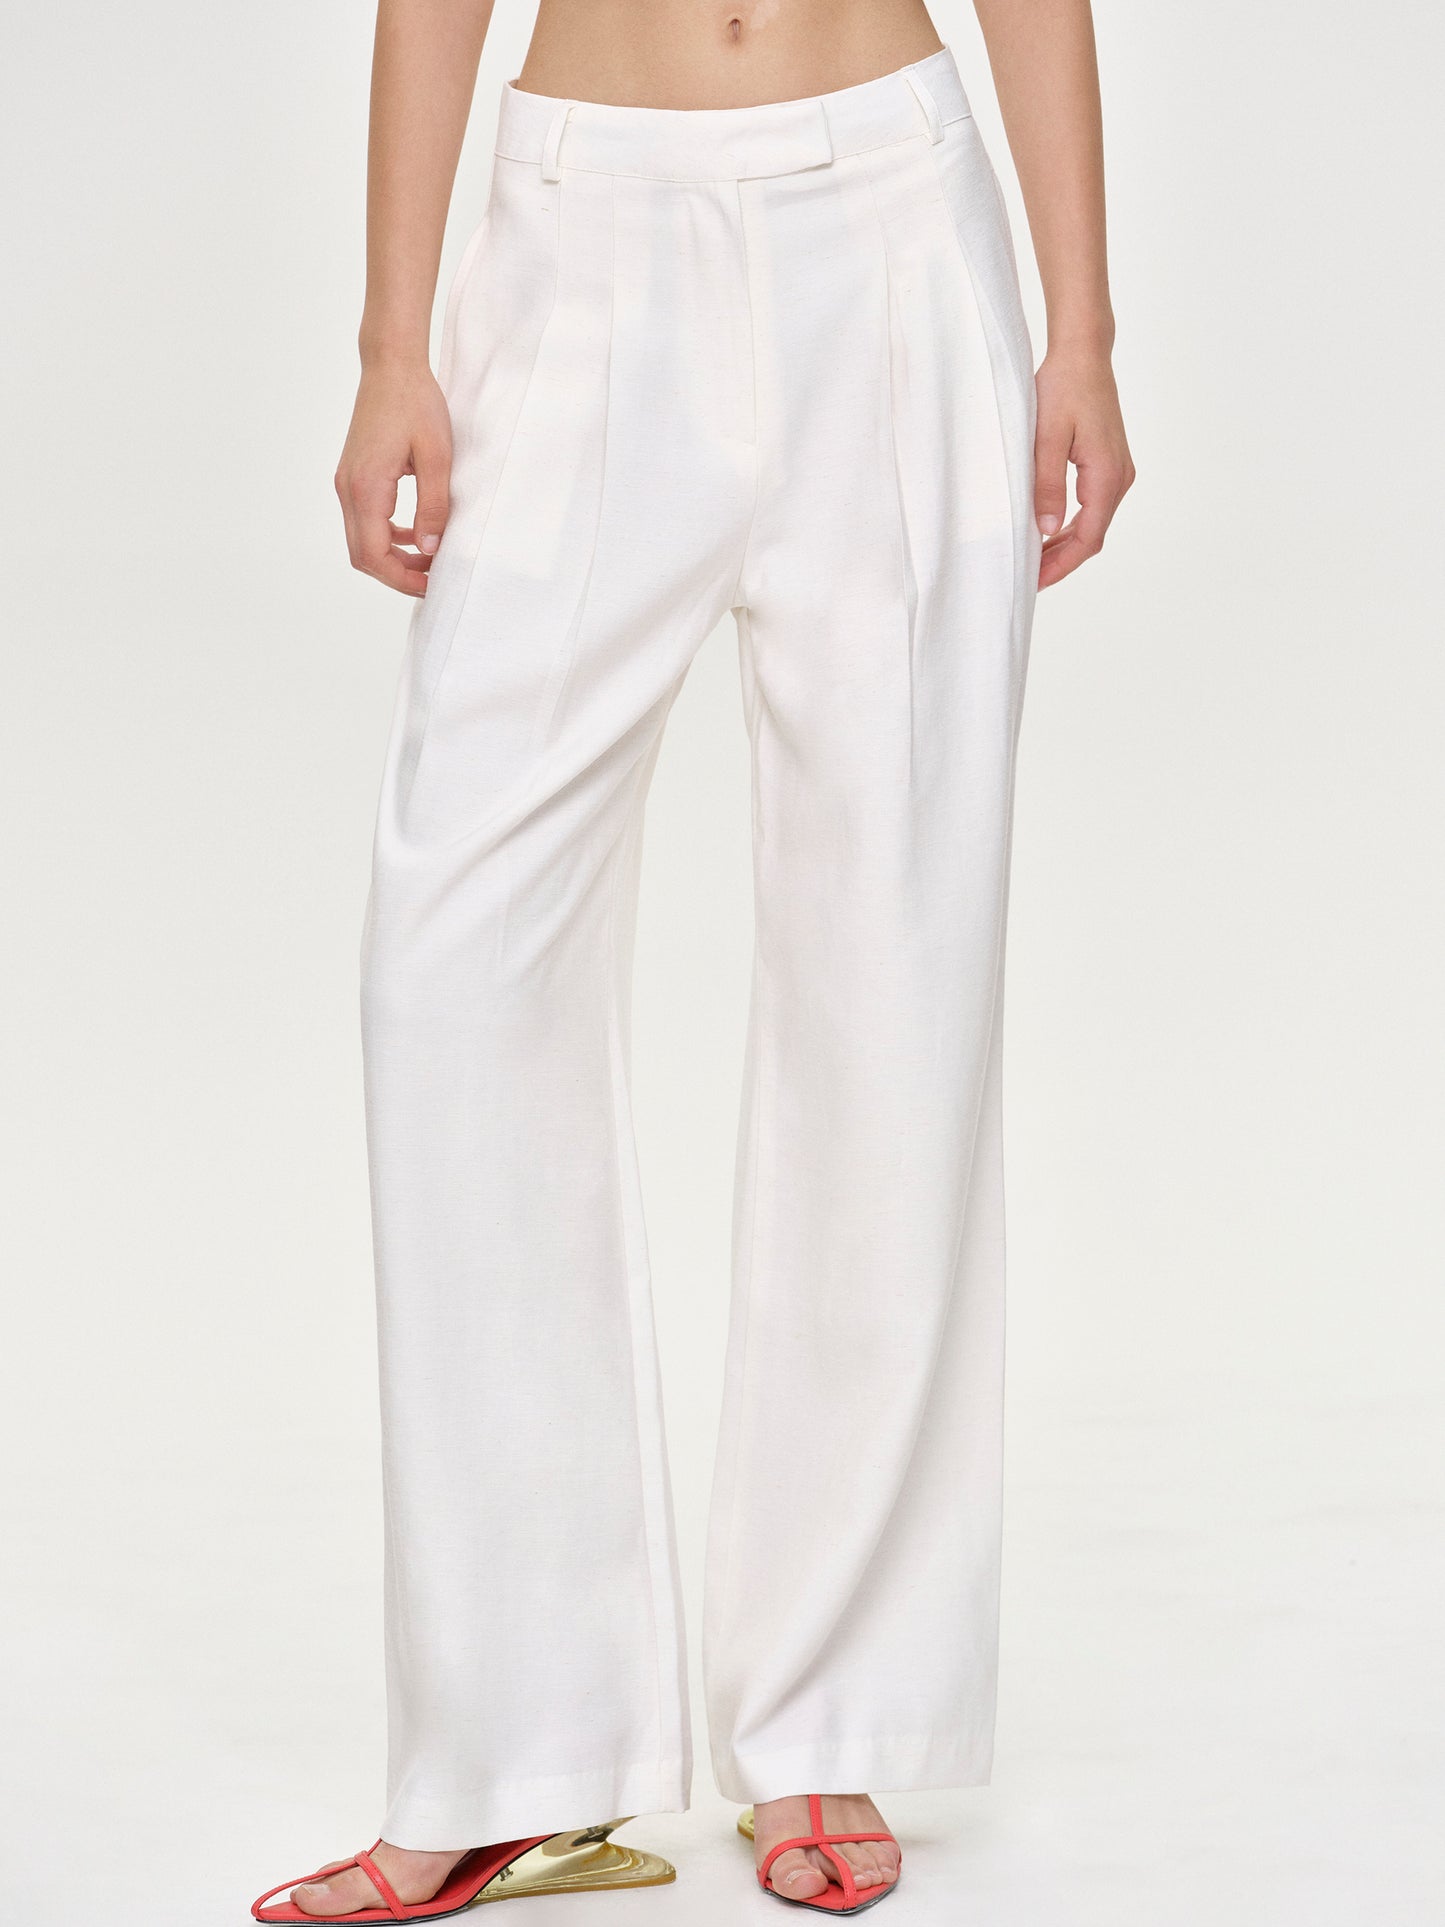 Pintuck Linen Trousers, Ivory